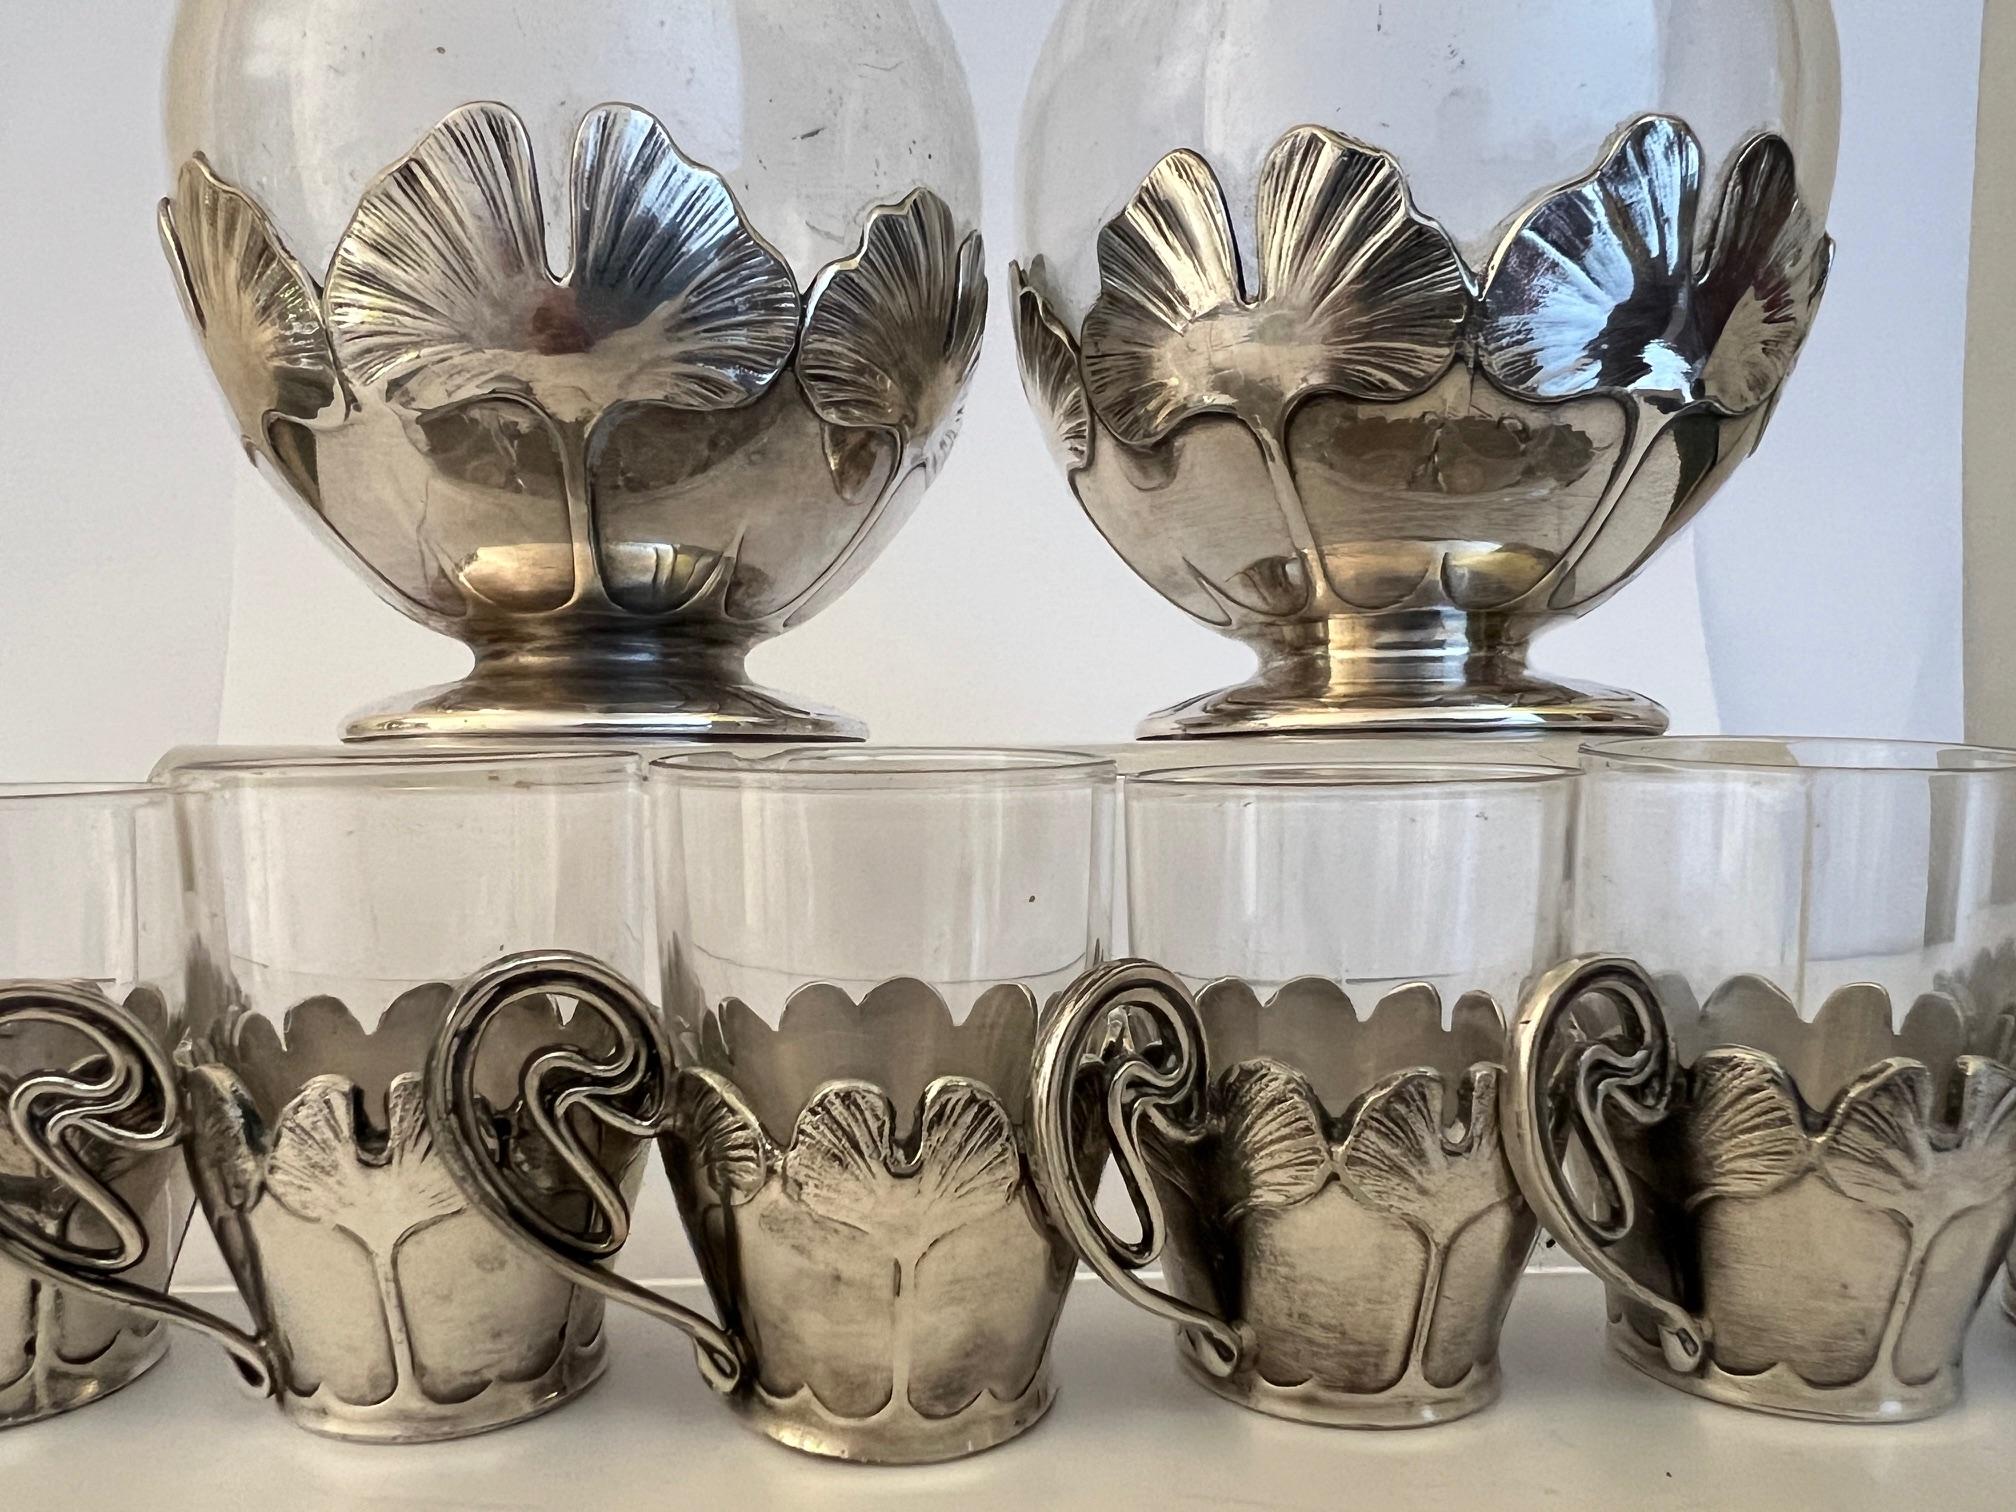 Early 20th Century Christofle Art Nouveau Decanter and Glass Set of 8 For Sale 6